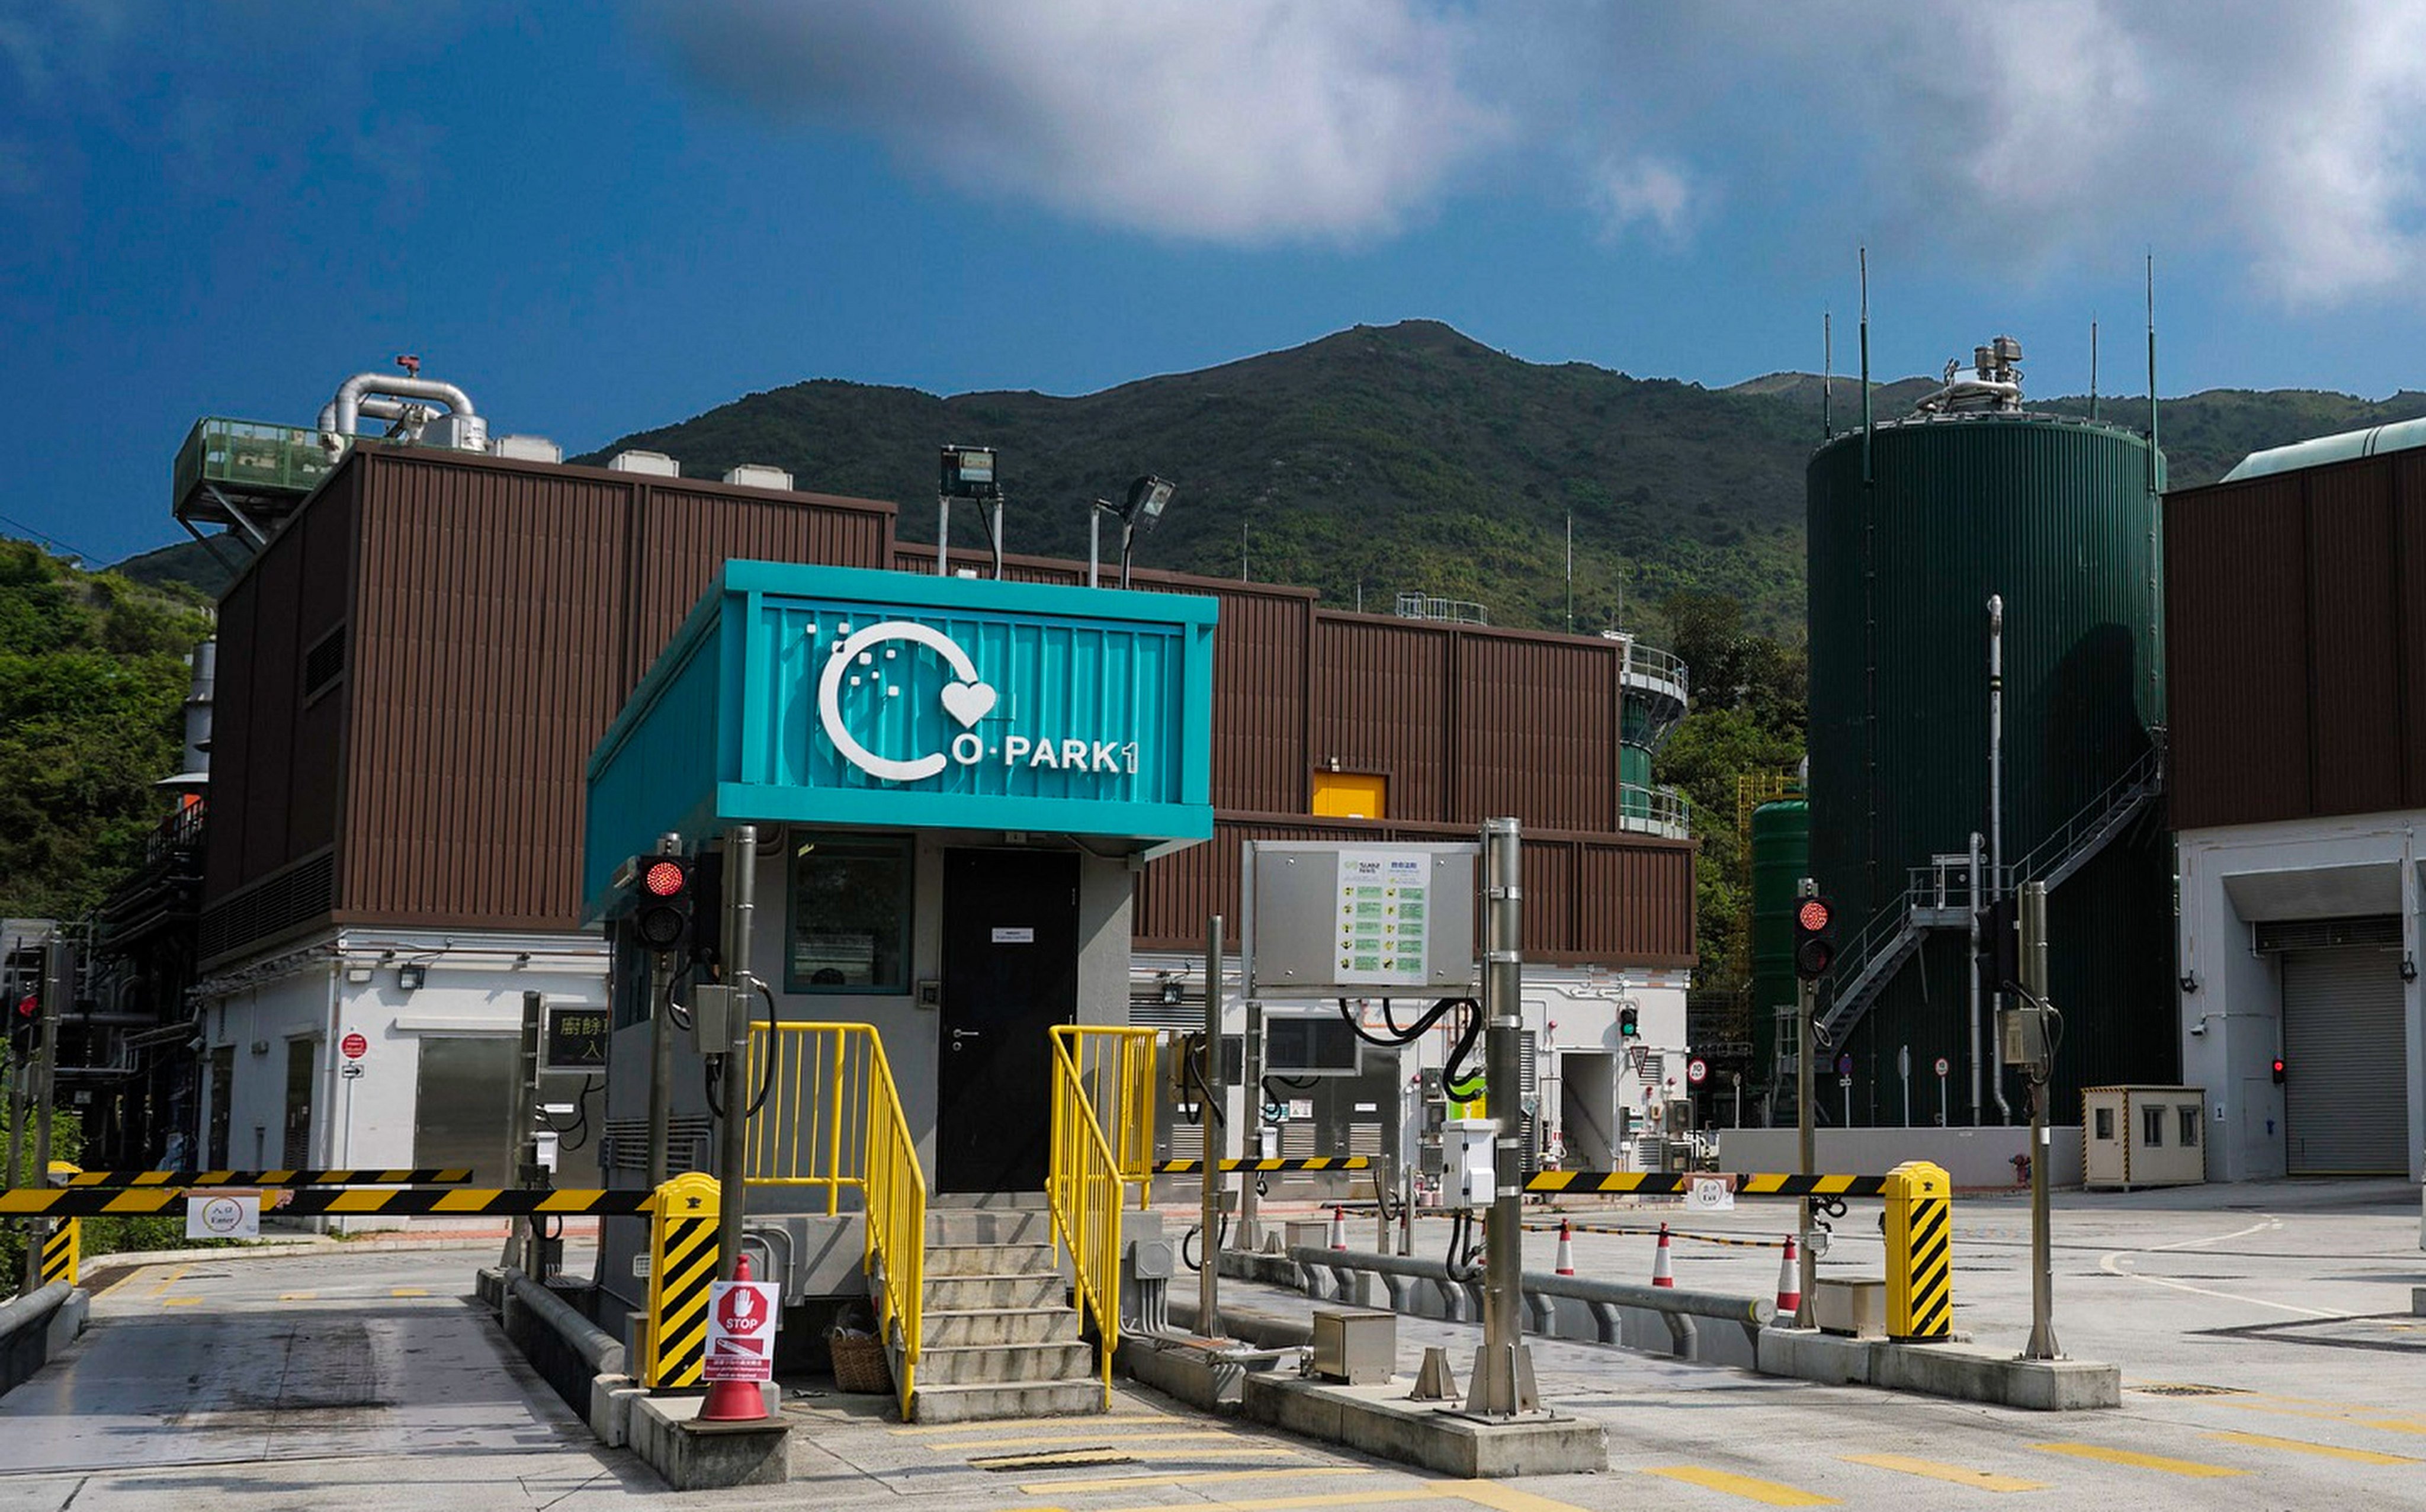 O Park is Hong Kong’s first organic waste treatment facility and has been in operation since 2018. Photo: hkgbc